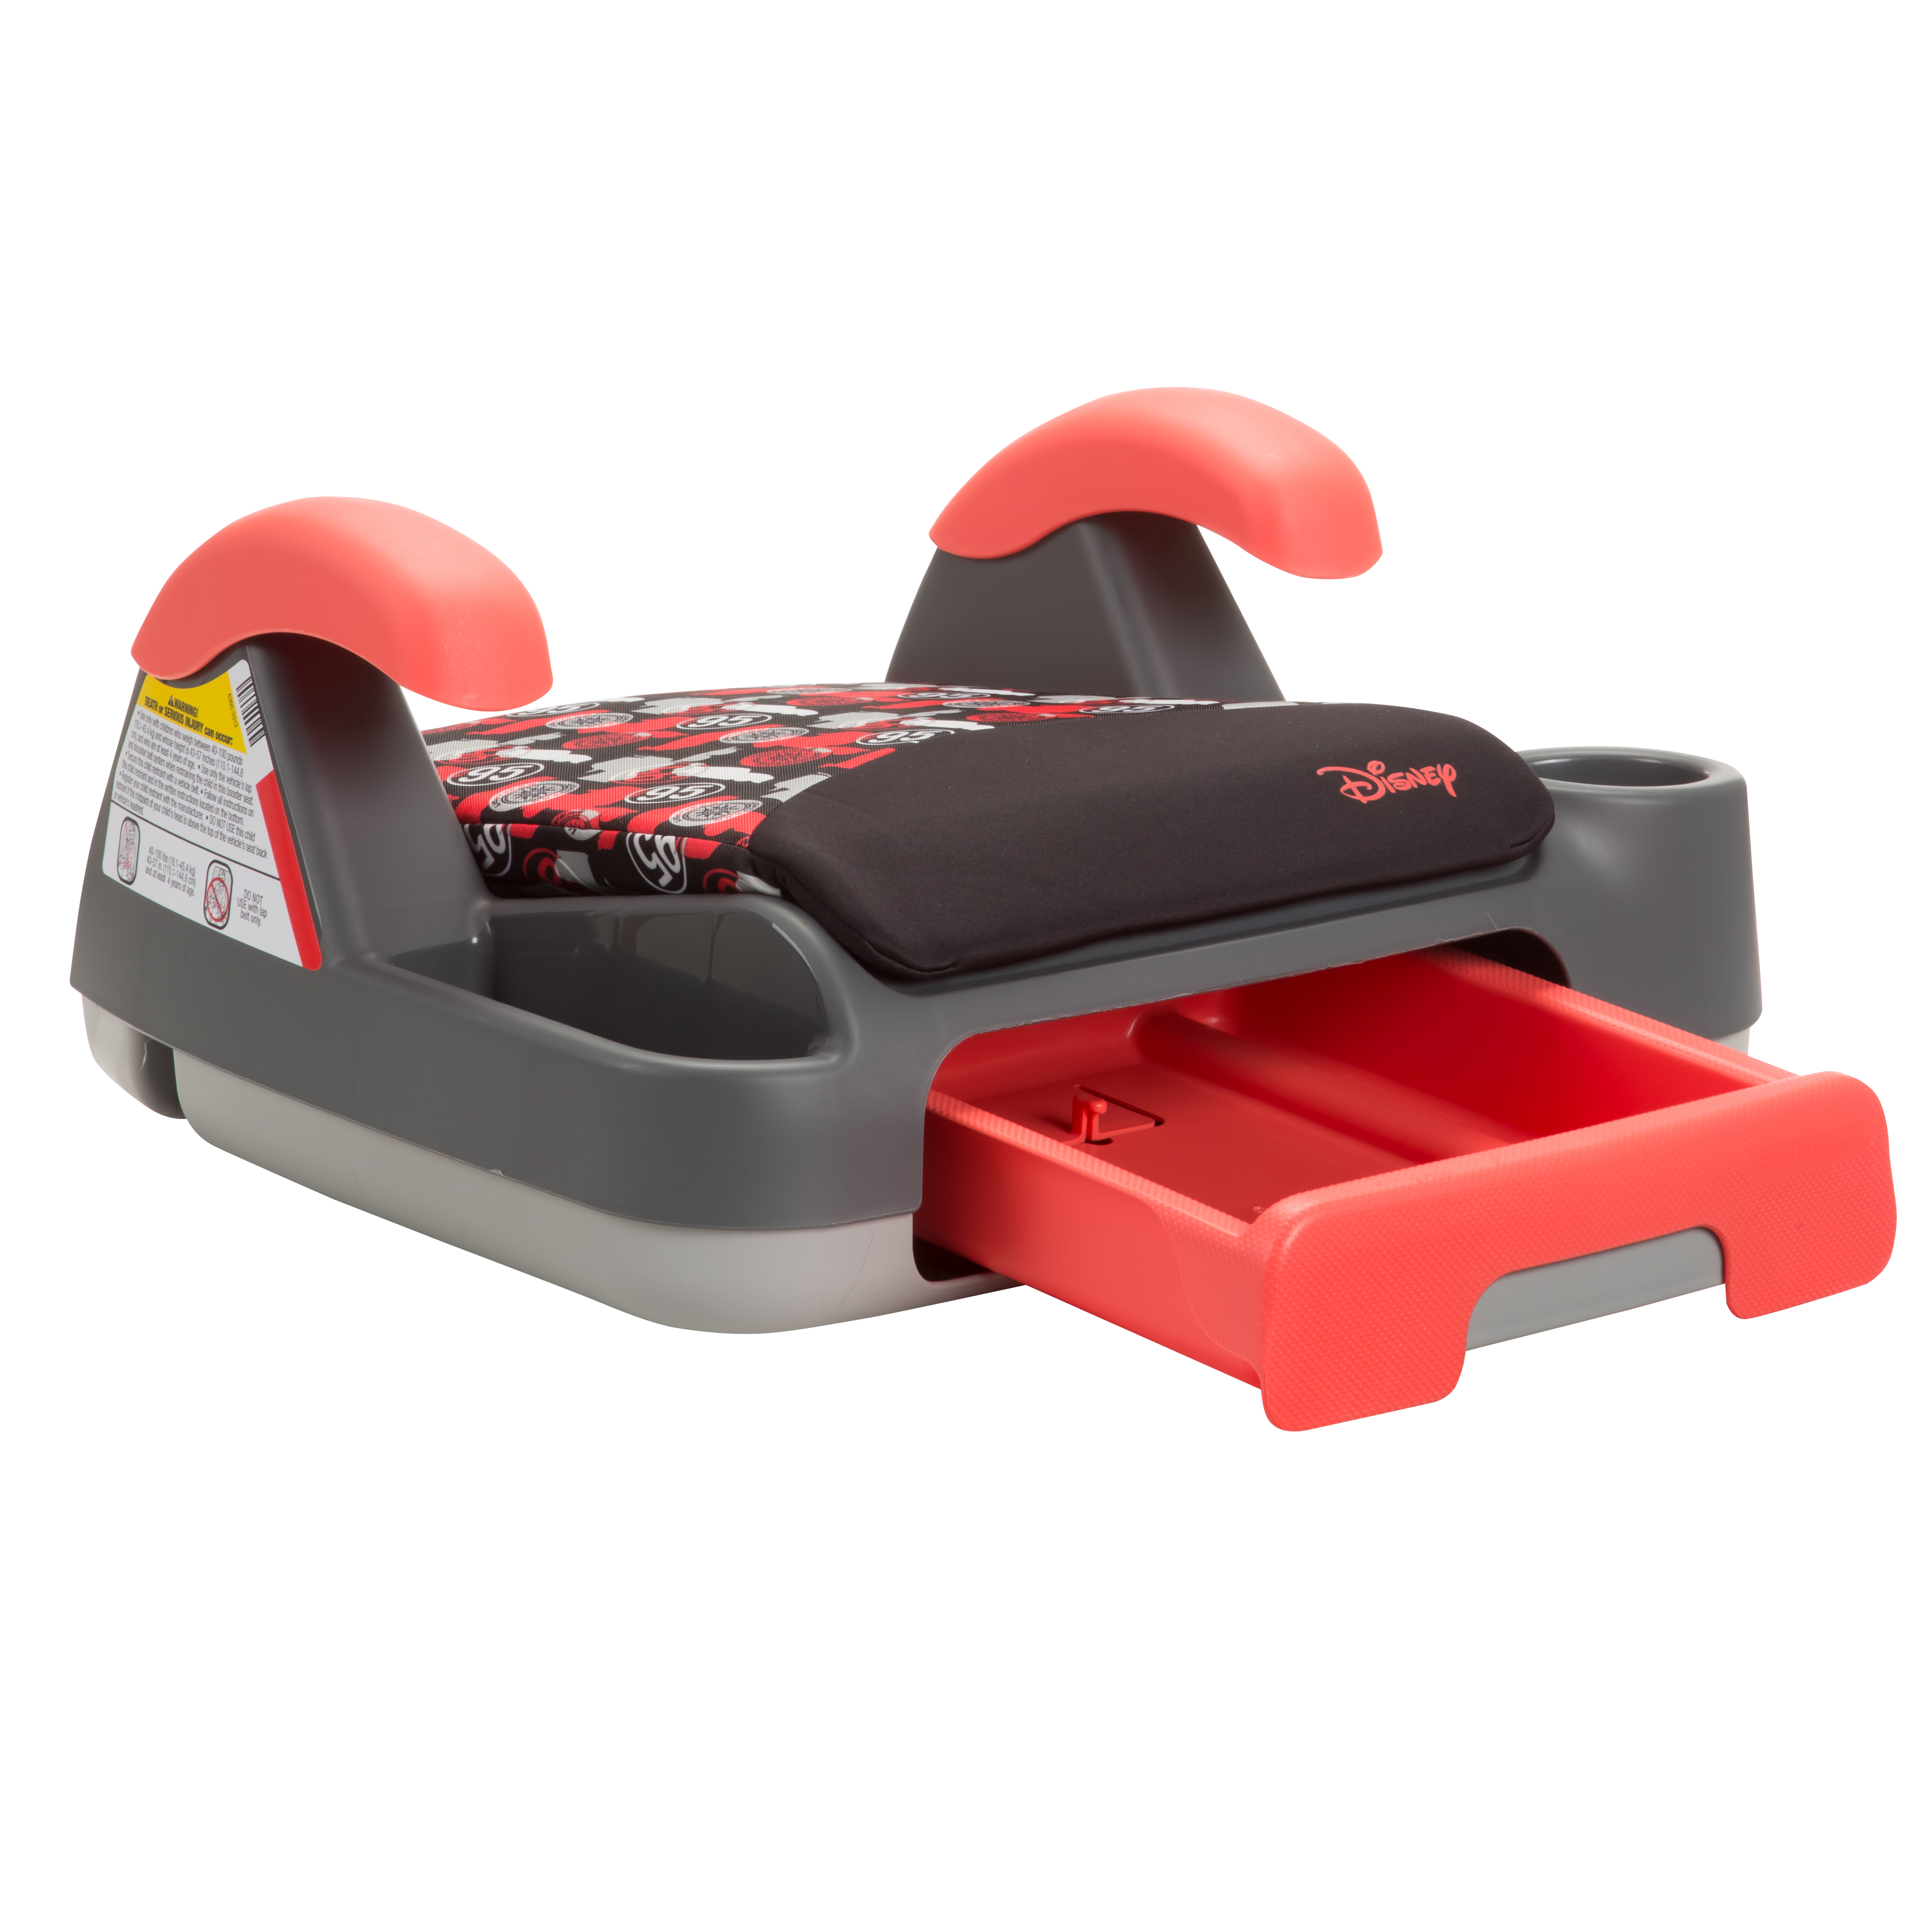 Disney Baby Store 'n Go Backless Booster Car Seat, Formula Racer - image 5 of 9